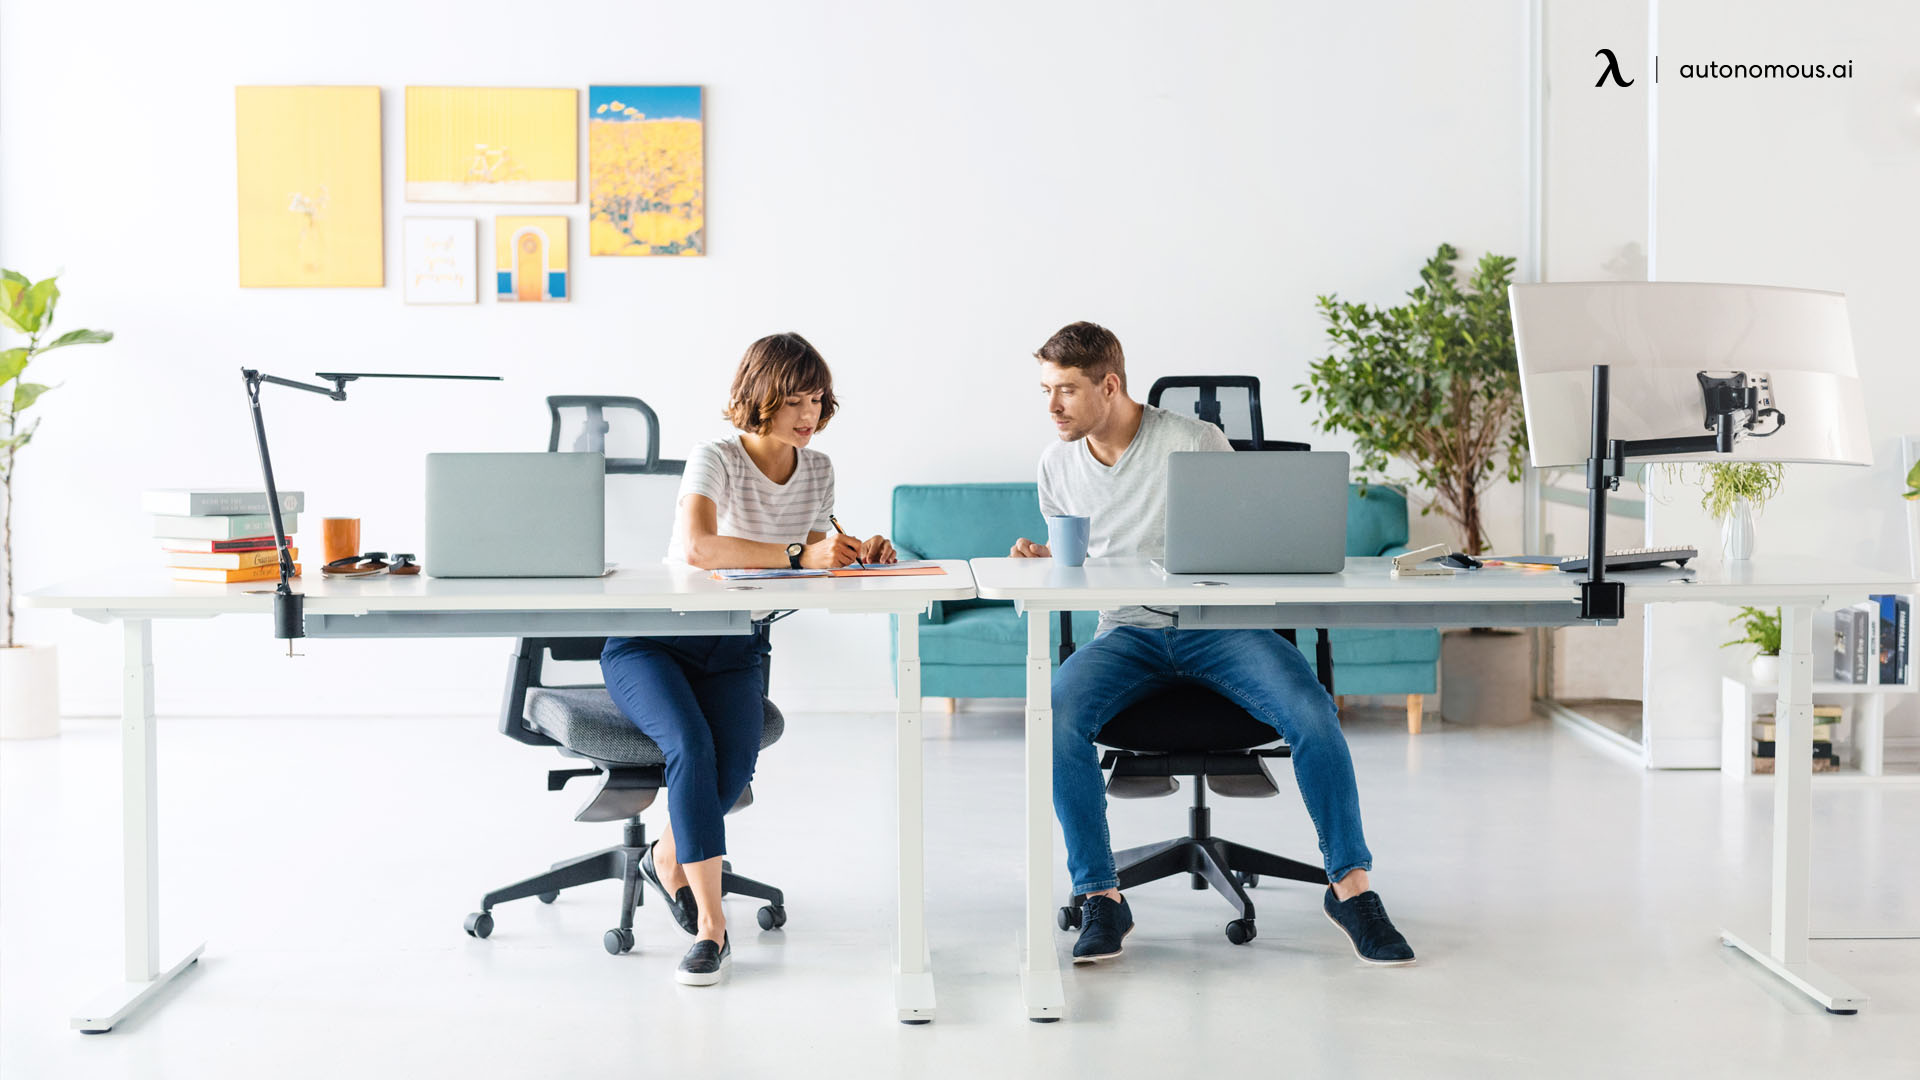 Different types of workspaces